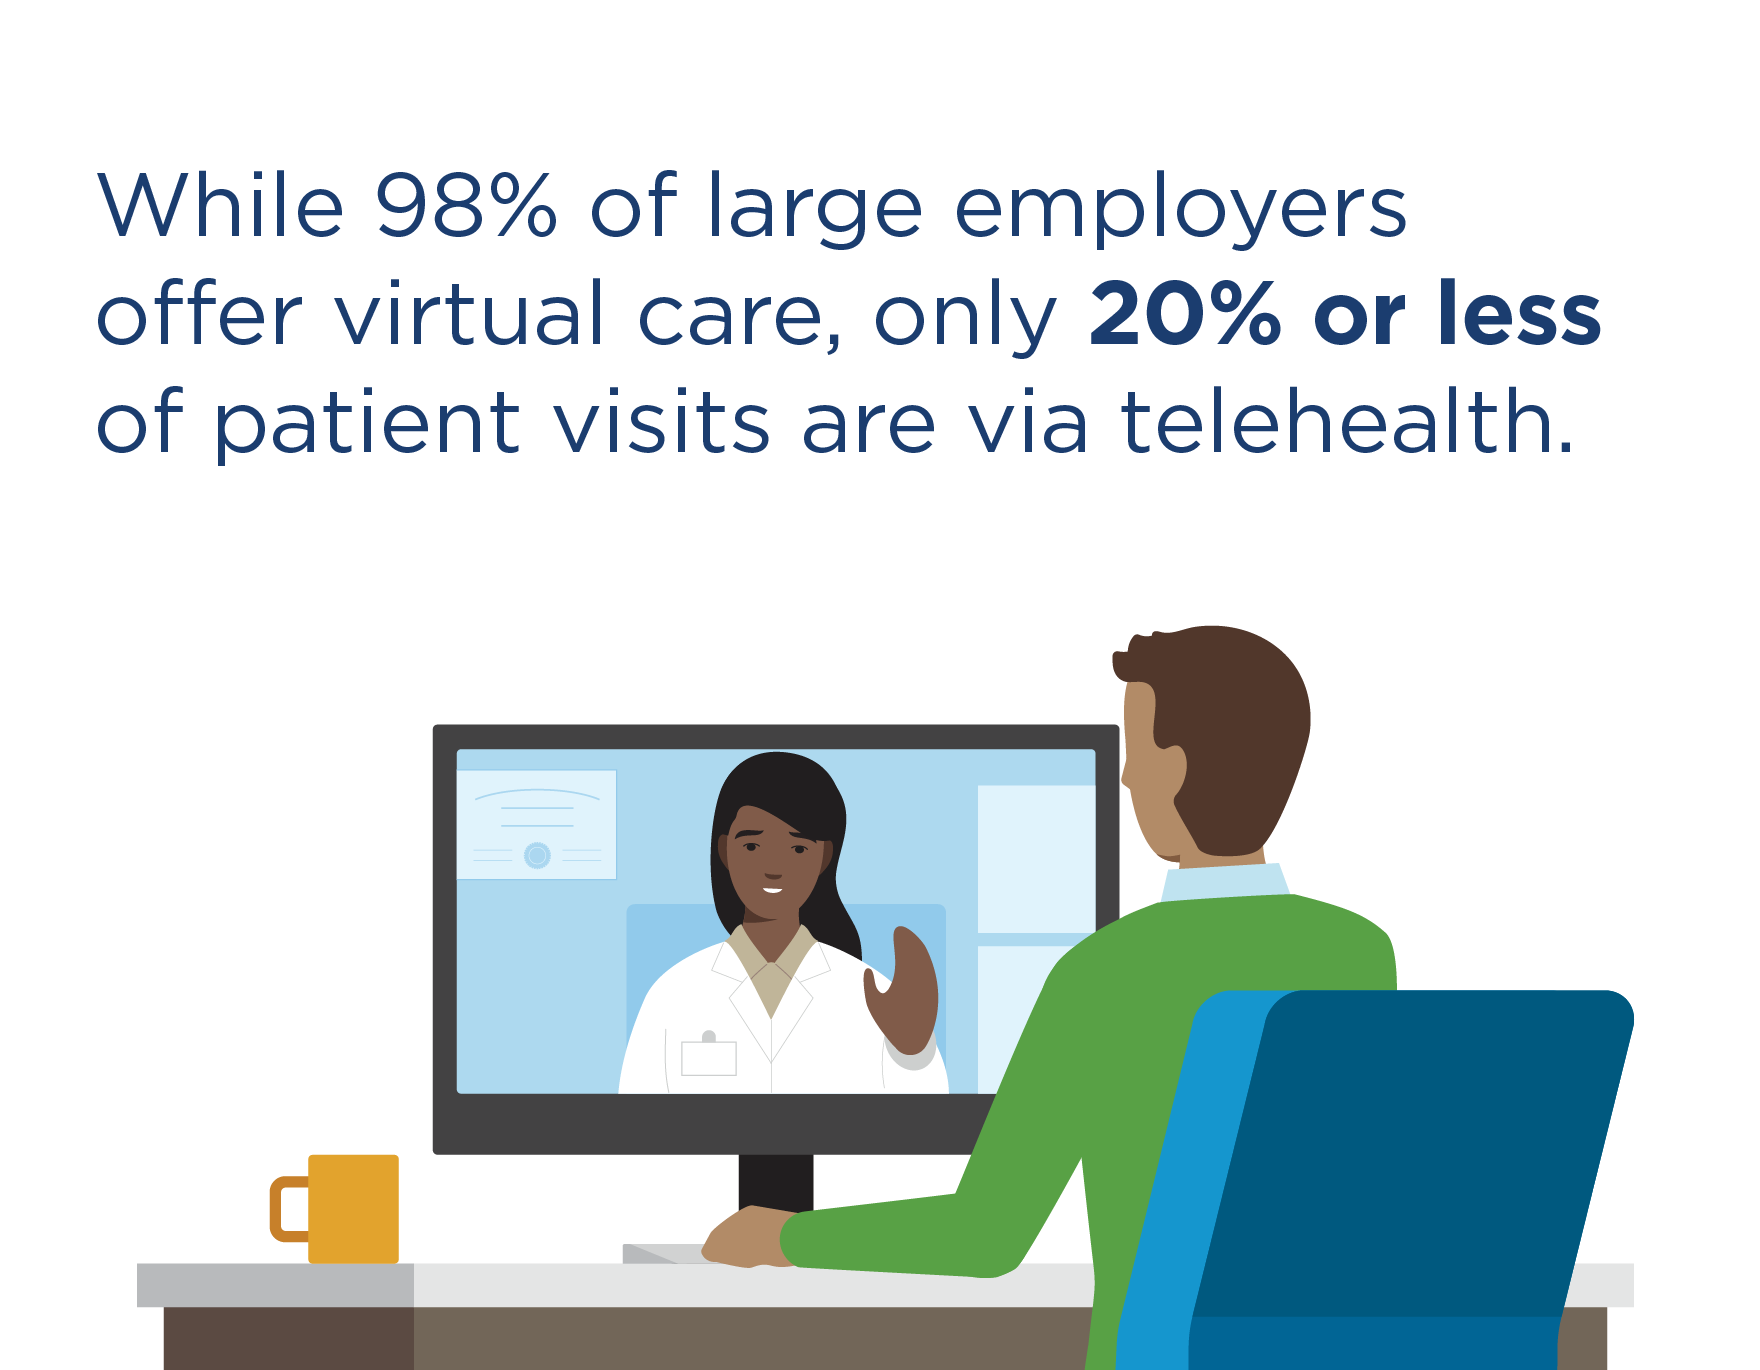 While 98% of large employers offer virtual care, only 20% or less of patient visits are via telehealth. Person having a video visit with a doctor on a computer